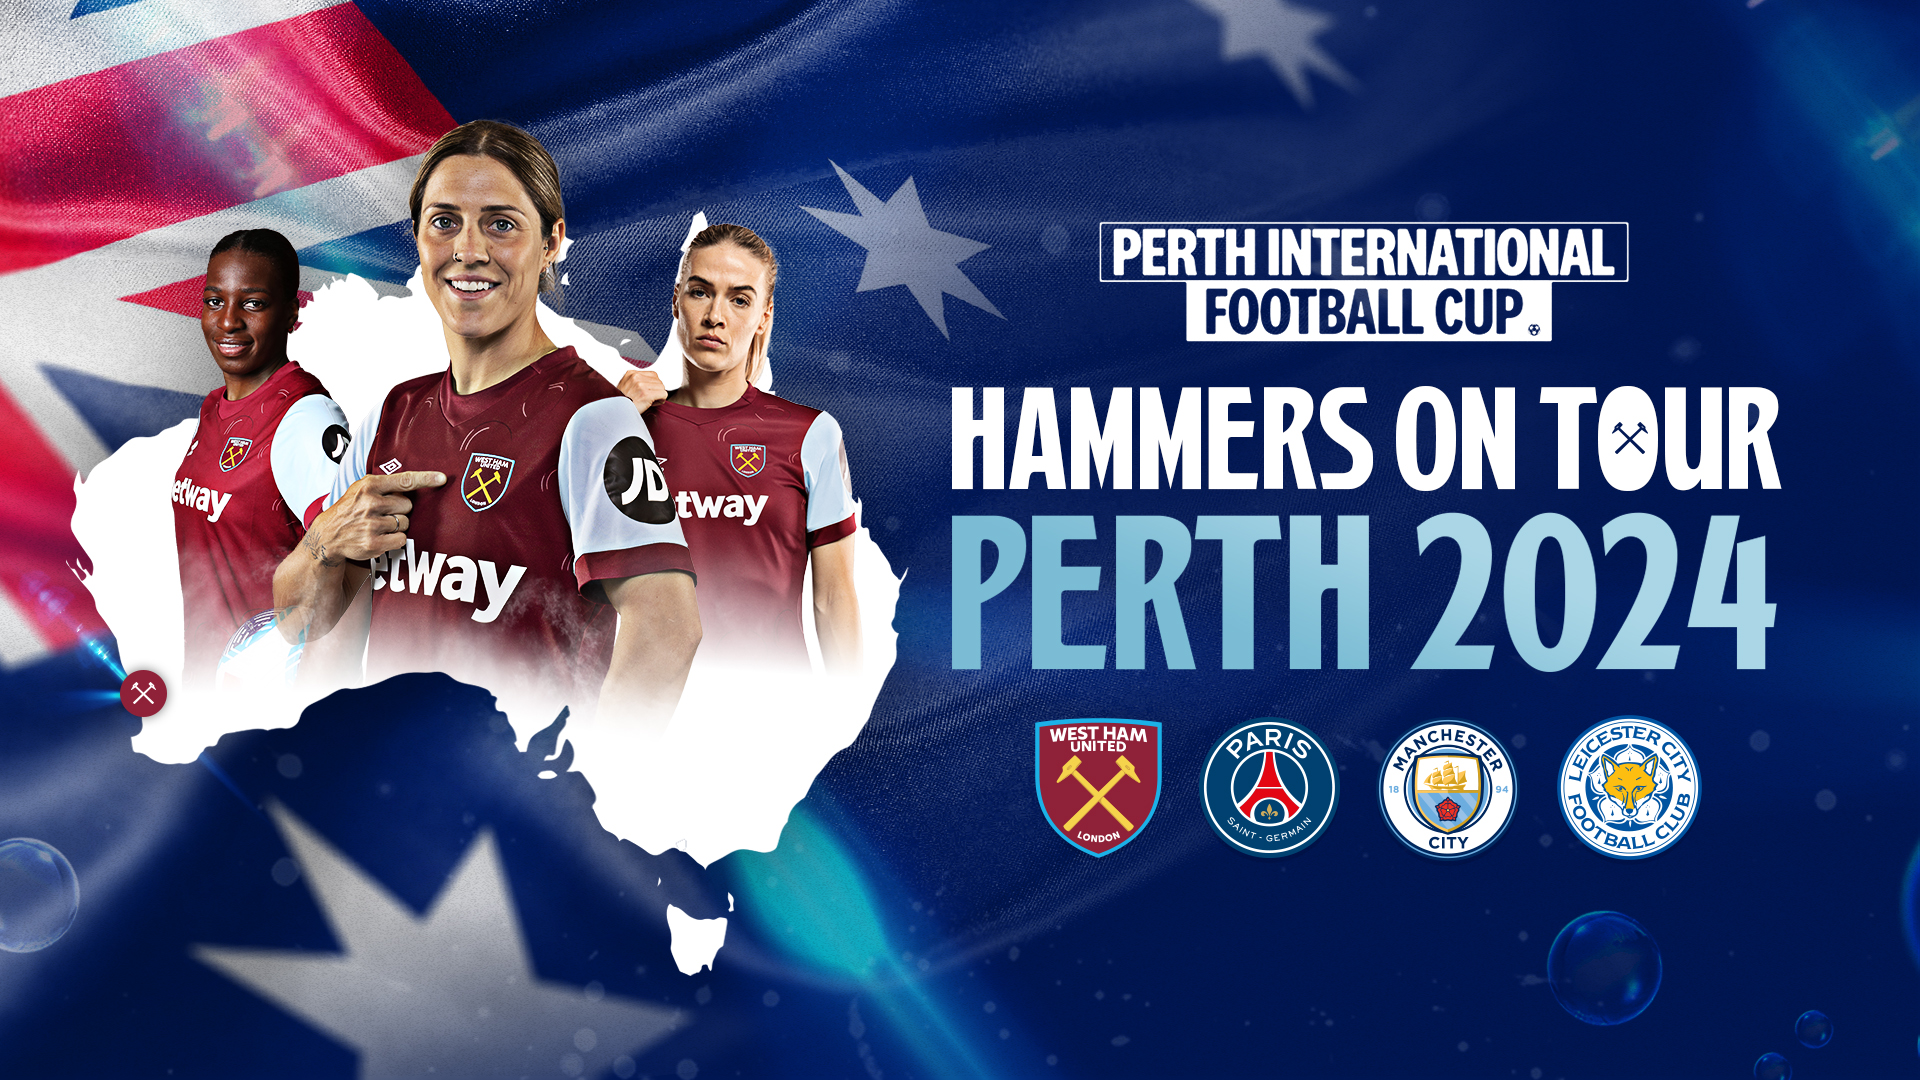 The Perth International Football Cup